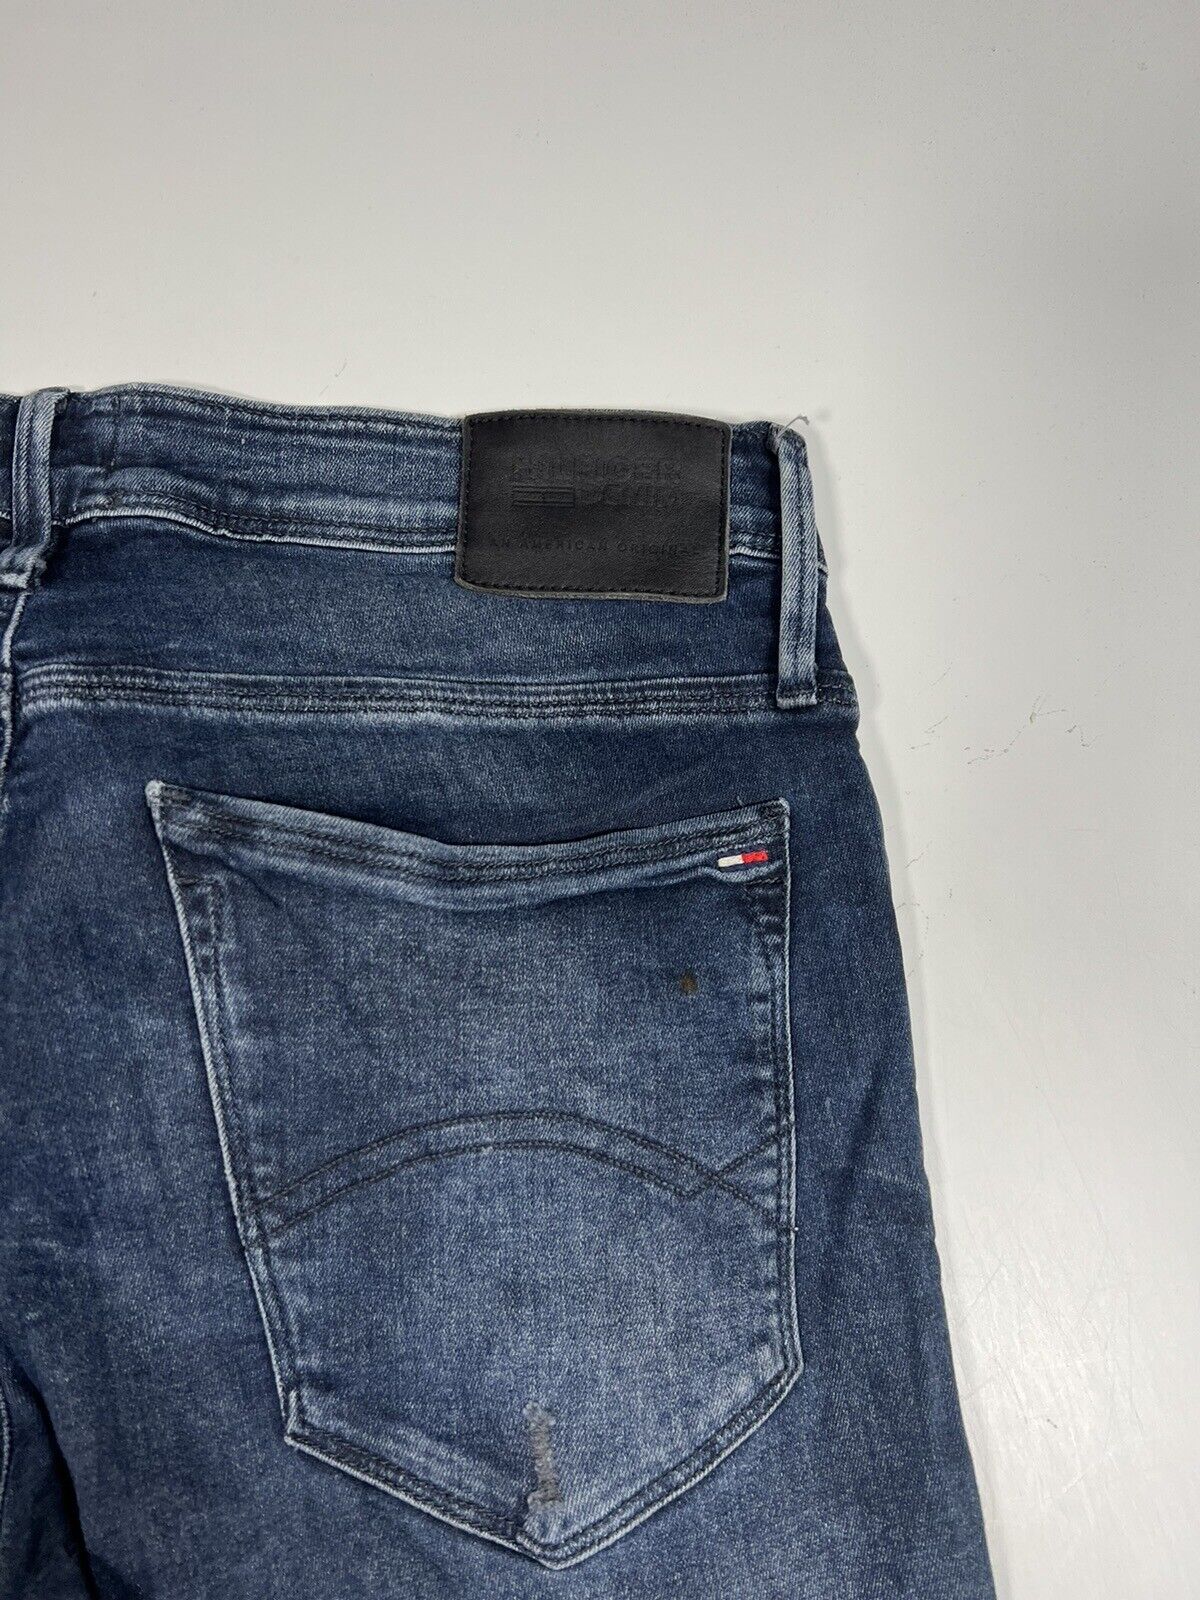 TOMMY HILFIGER SIDNEY SKINNY Jeans - W33 L32 - Navy - Great Condition ...